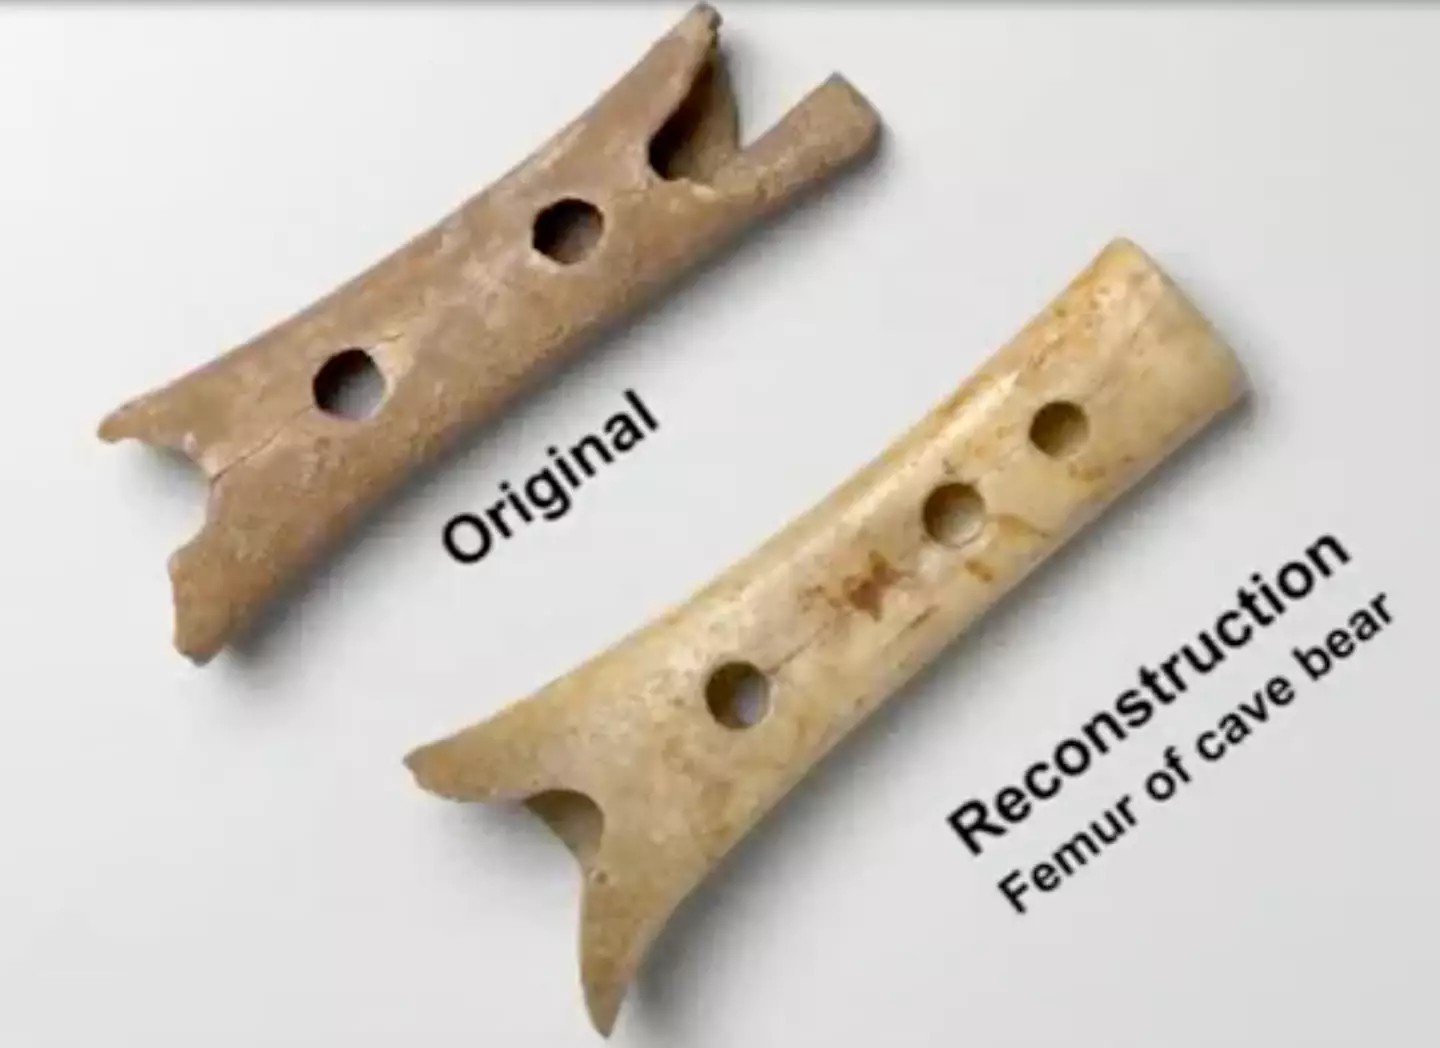 A comparison of the original and the reconstructed flute.